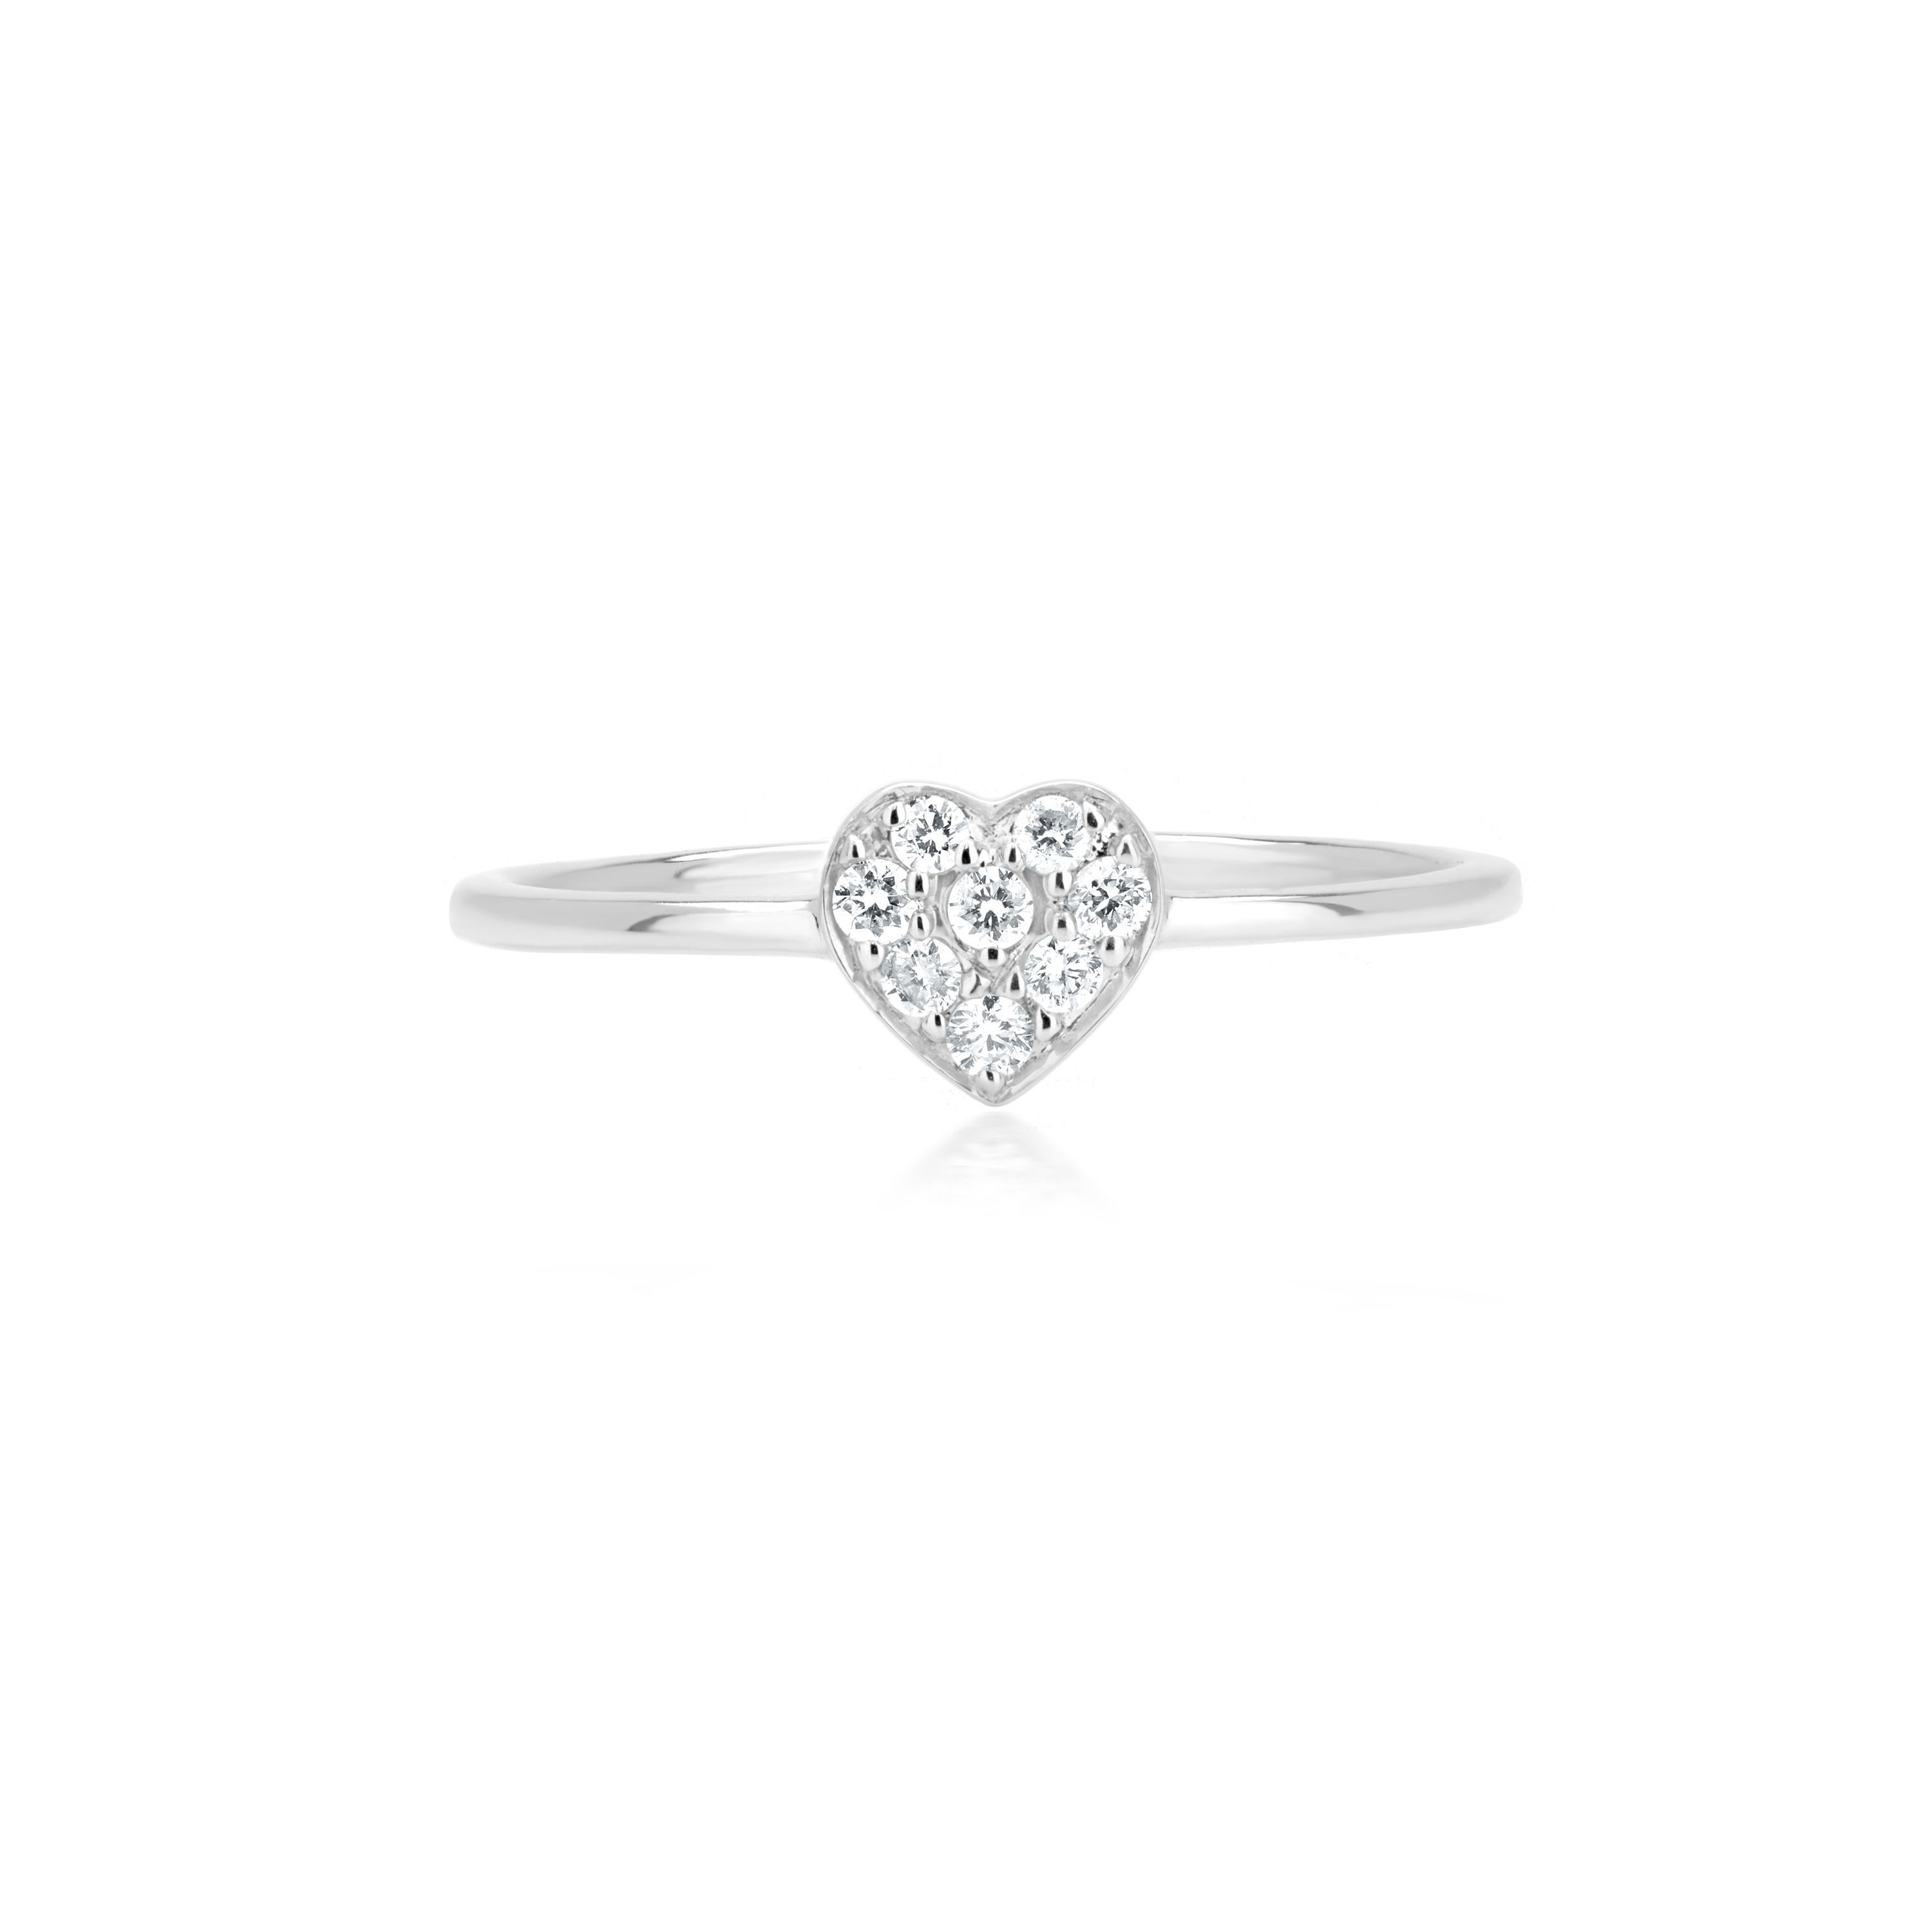 This Luxle 18K White Gold band ring has a heart-shaped structure in the middle which is made up of round full-cut white diamonds in a micro pave setting. The diamonds are I1 in clarity and GH in color, weighing 0.11 Cts. Be in that twinkling state